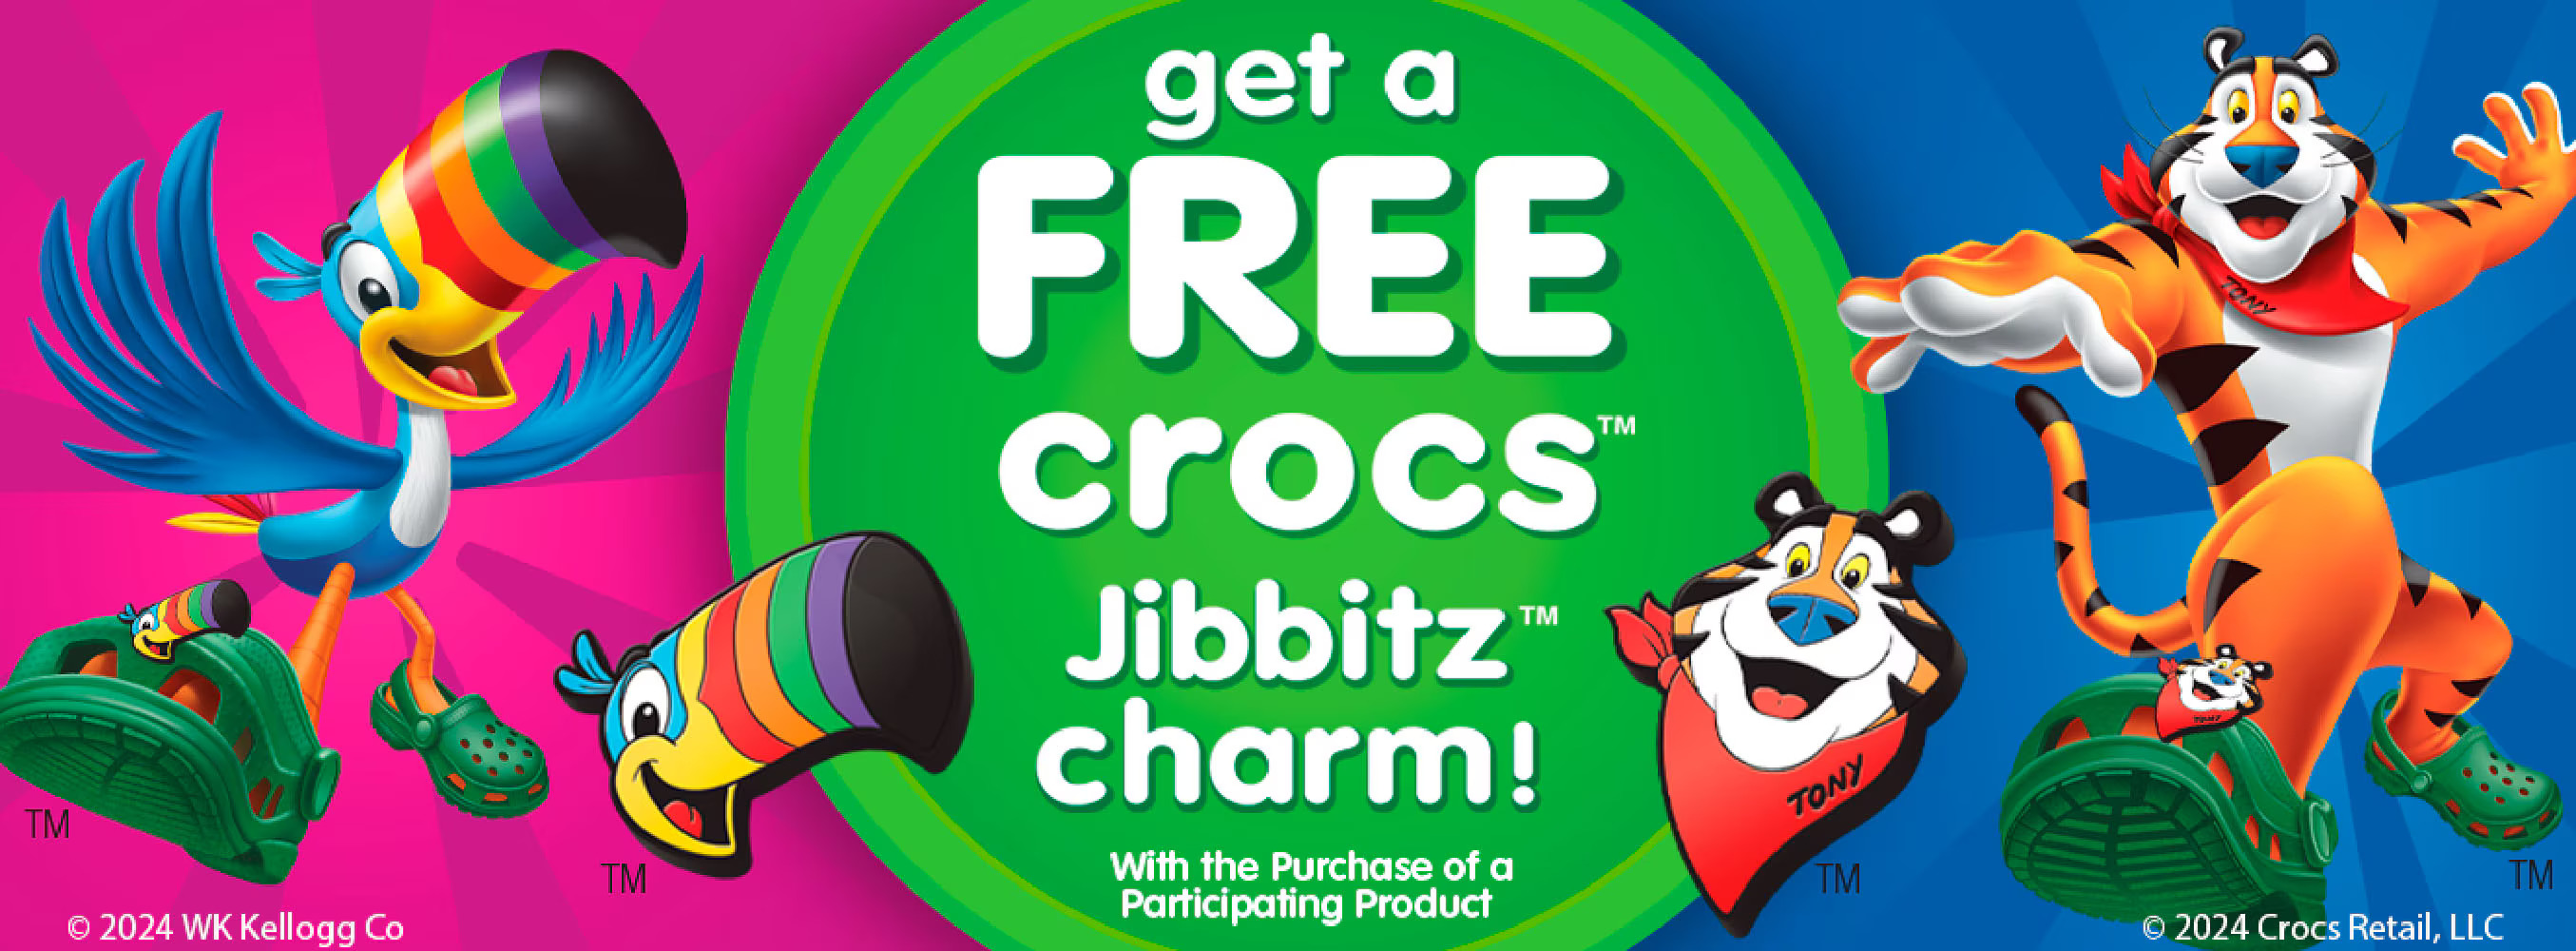 FREE Toucan Sam or Tony the Tiger Crocs Jibbitz Charm with Participating Kellogg's Product Purchase [4/1/24 - 12/31/24]